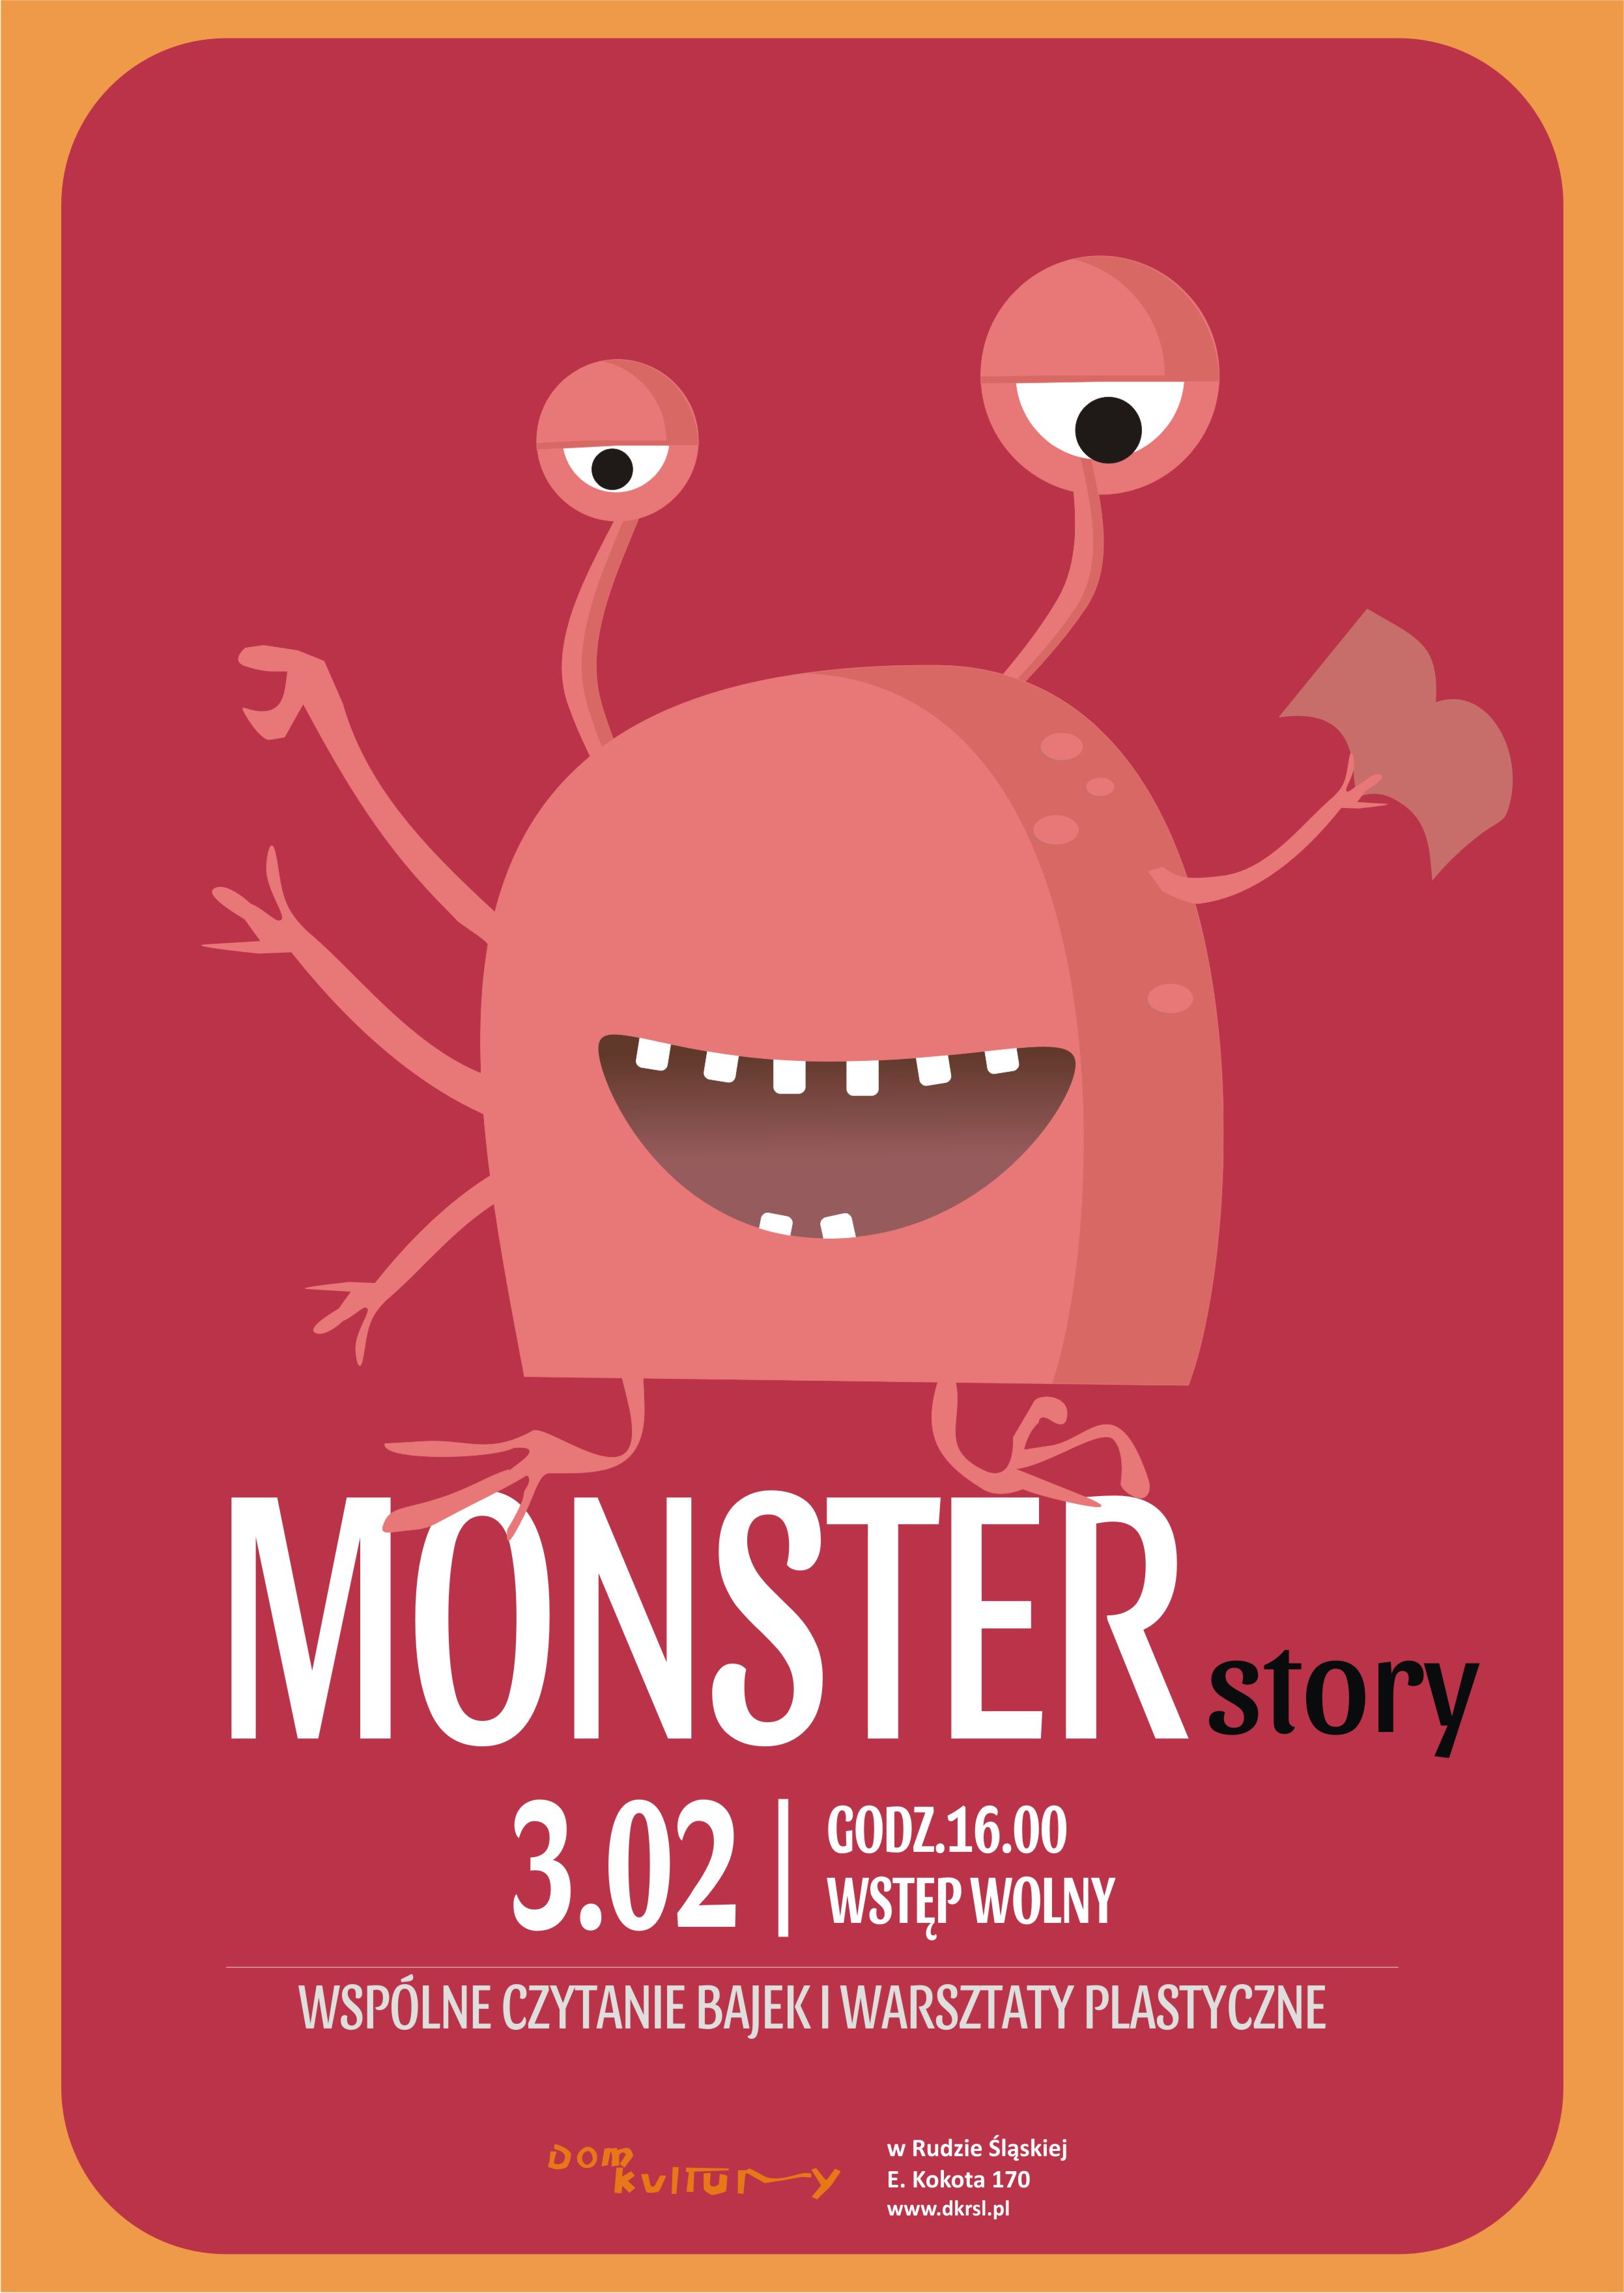 You are currently viewing Monster story